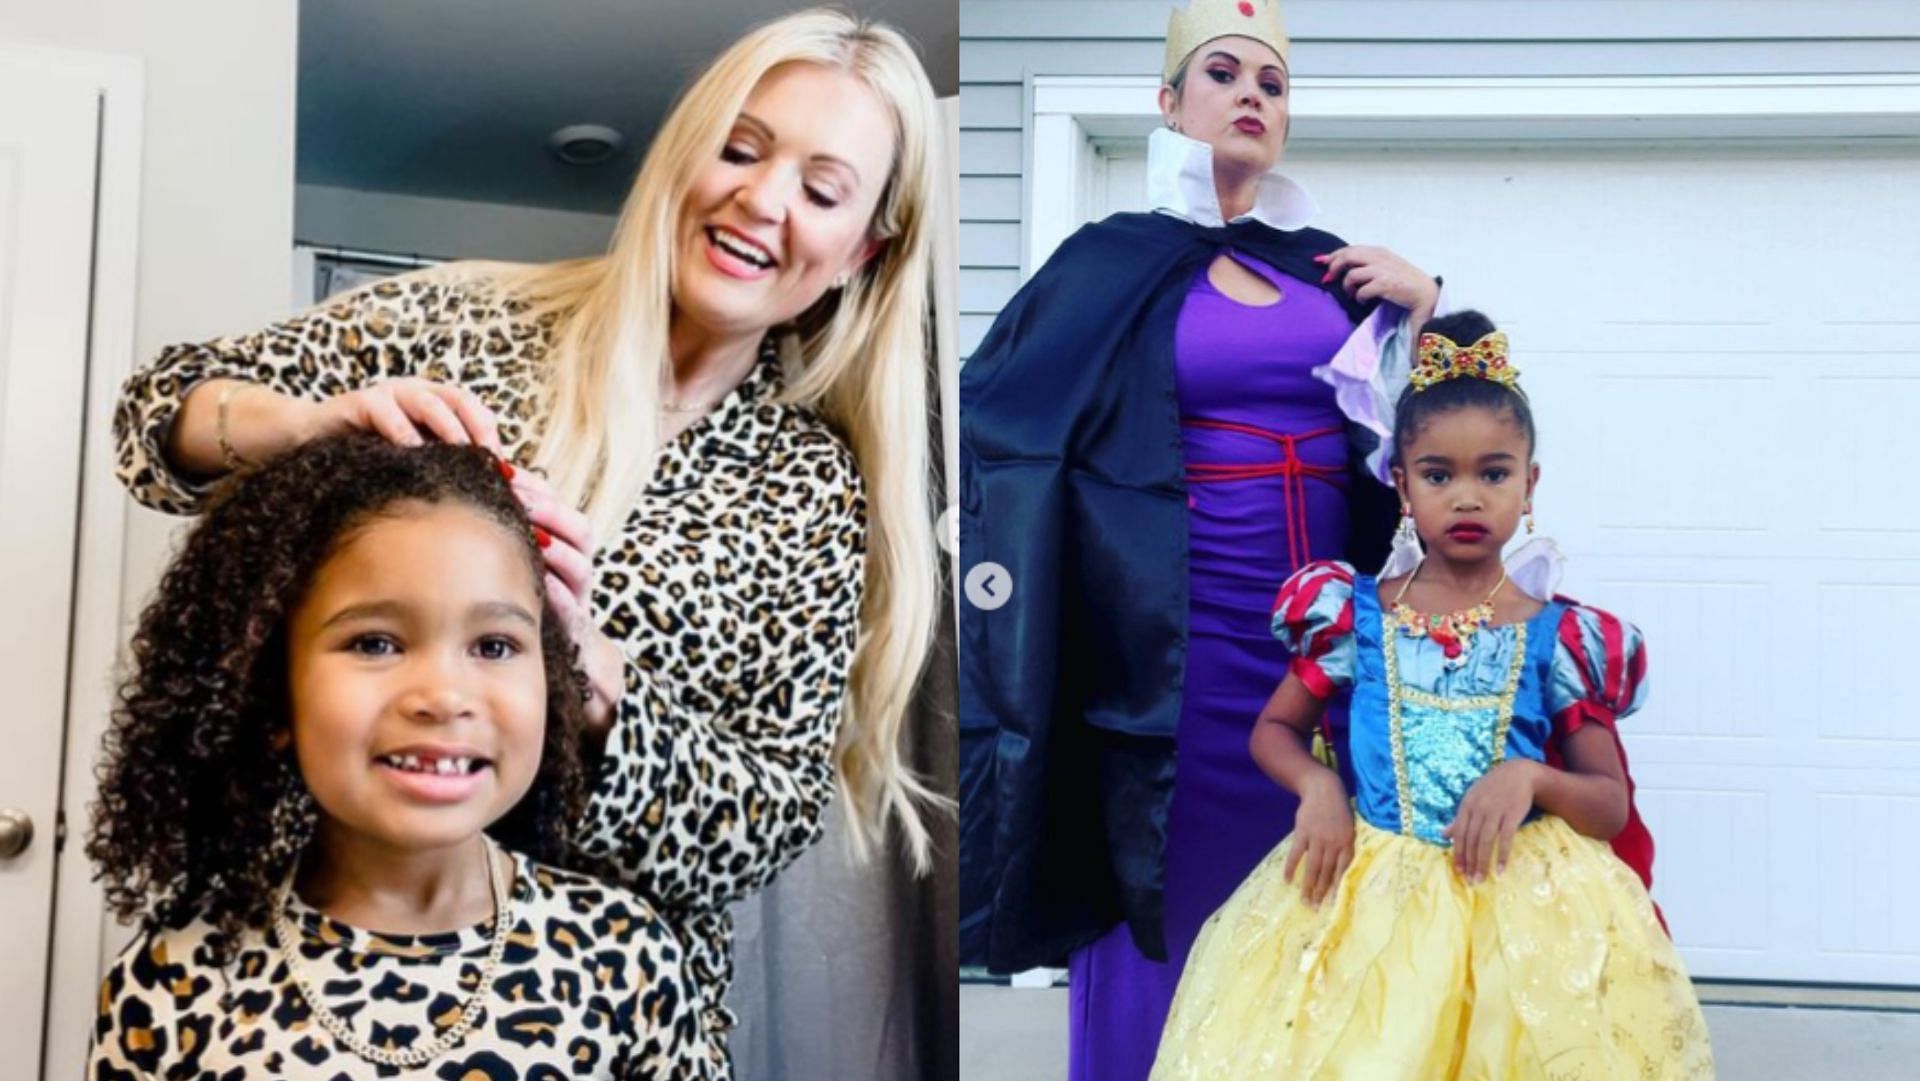 Influencer Tiania Haneline from the Scarlett and Tiania duo in hot water with netizens after she yells at her daughter in a TikTok video. (Image via Instagram/@scarlettandtiania)